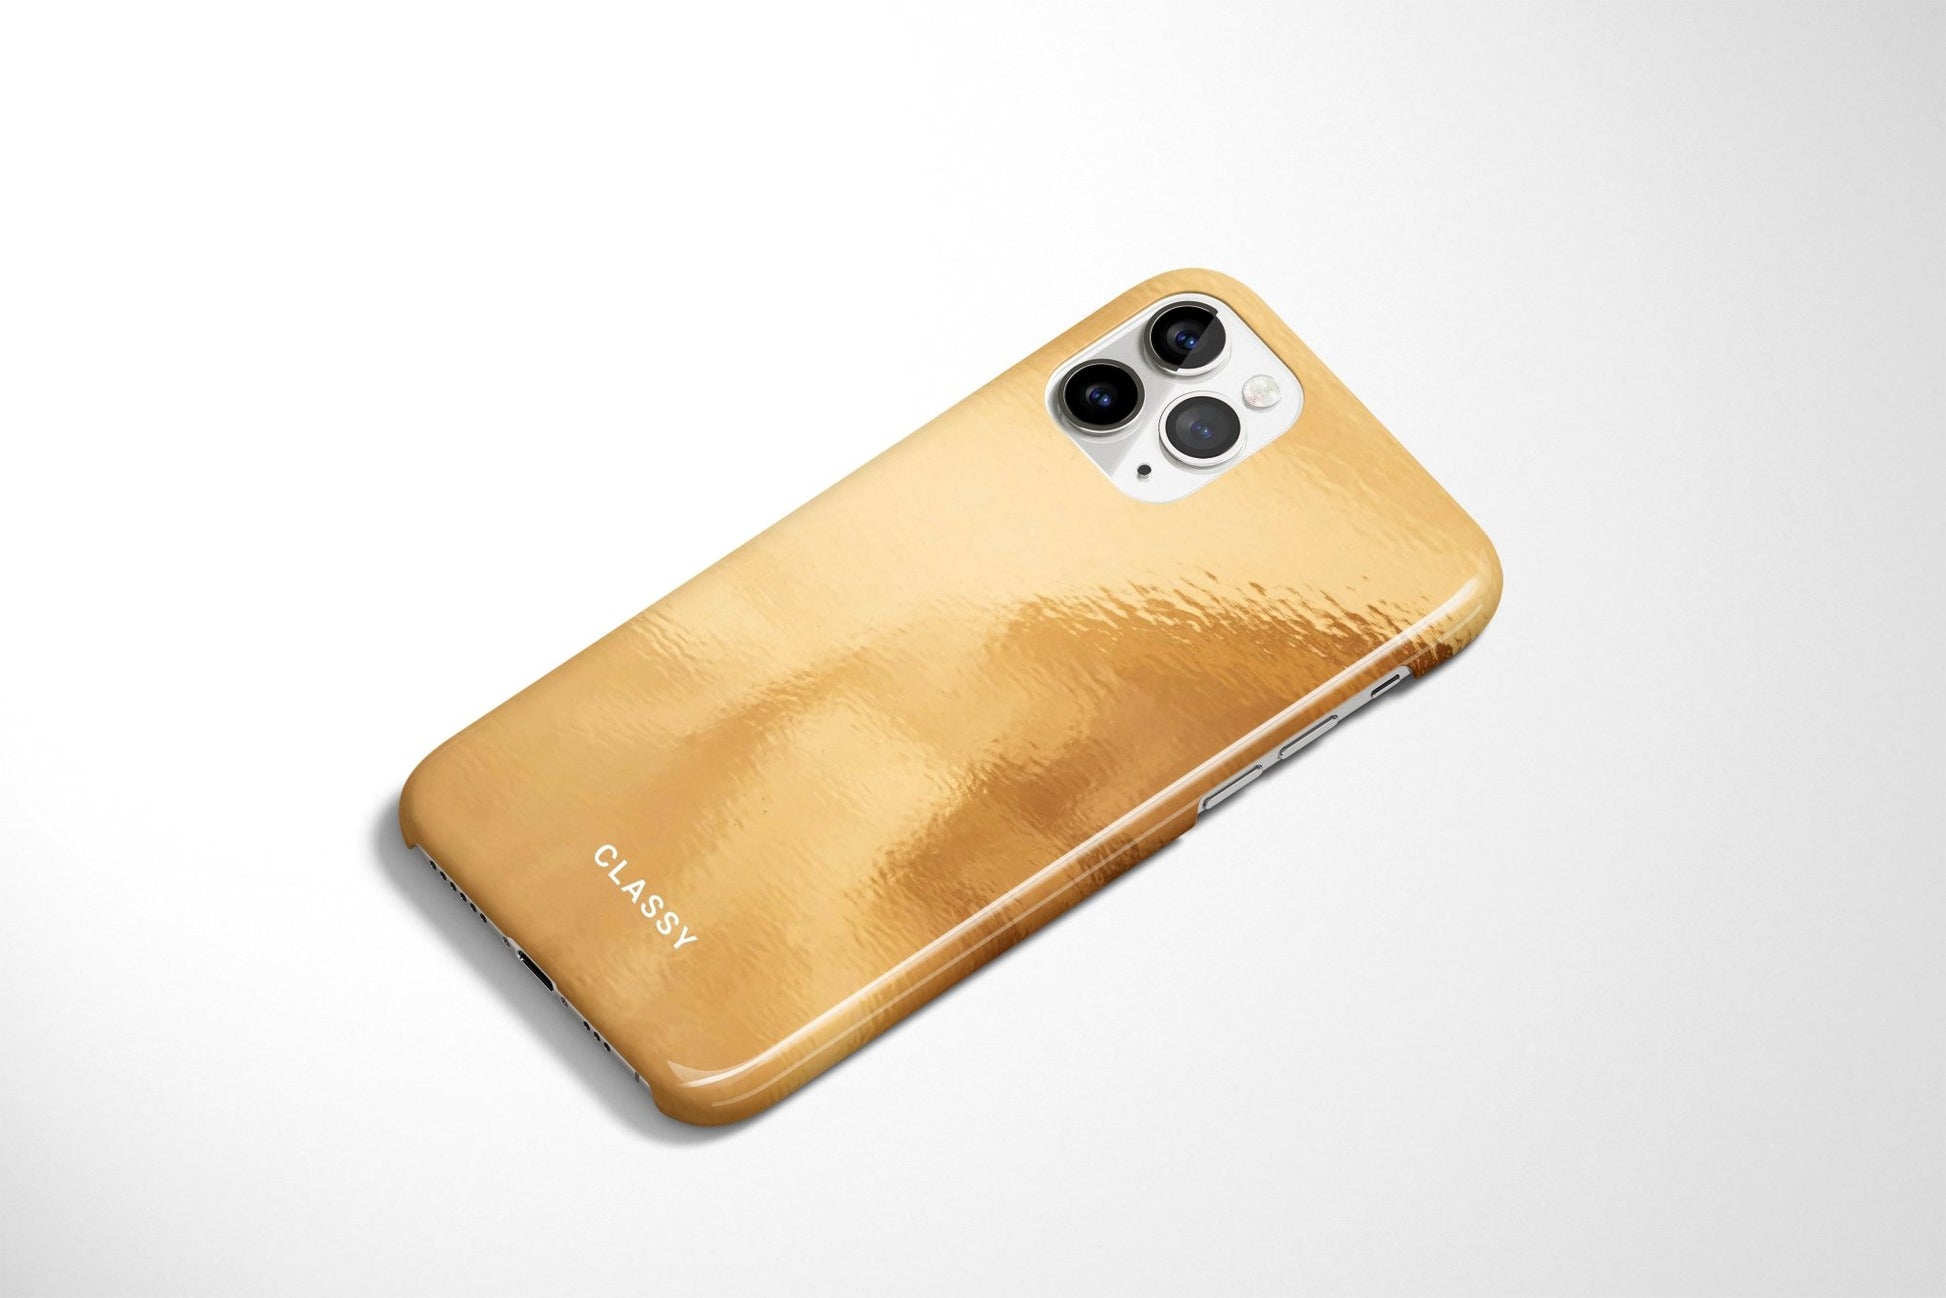 Glossy Pattern Gold Snap Case - Classy Cases